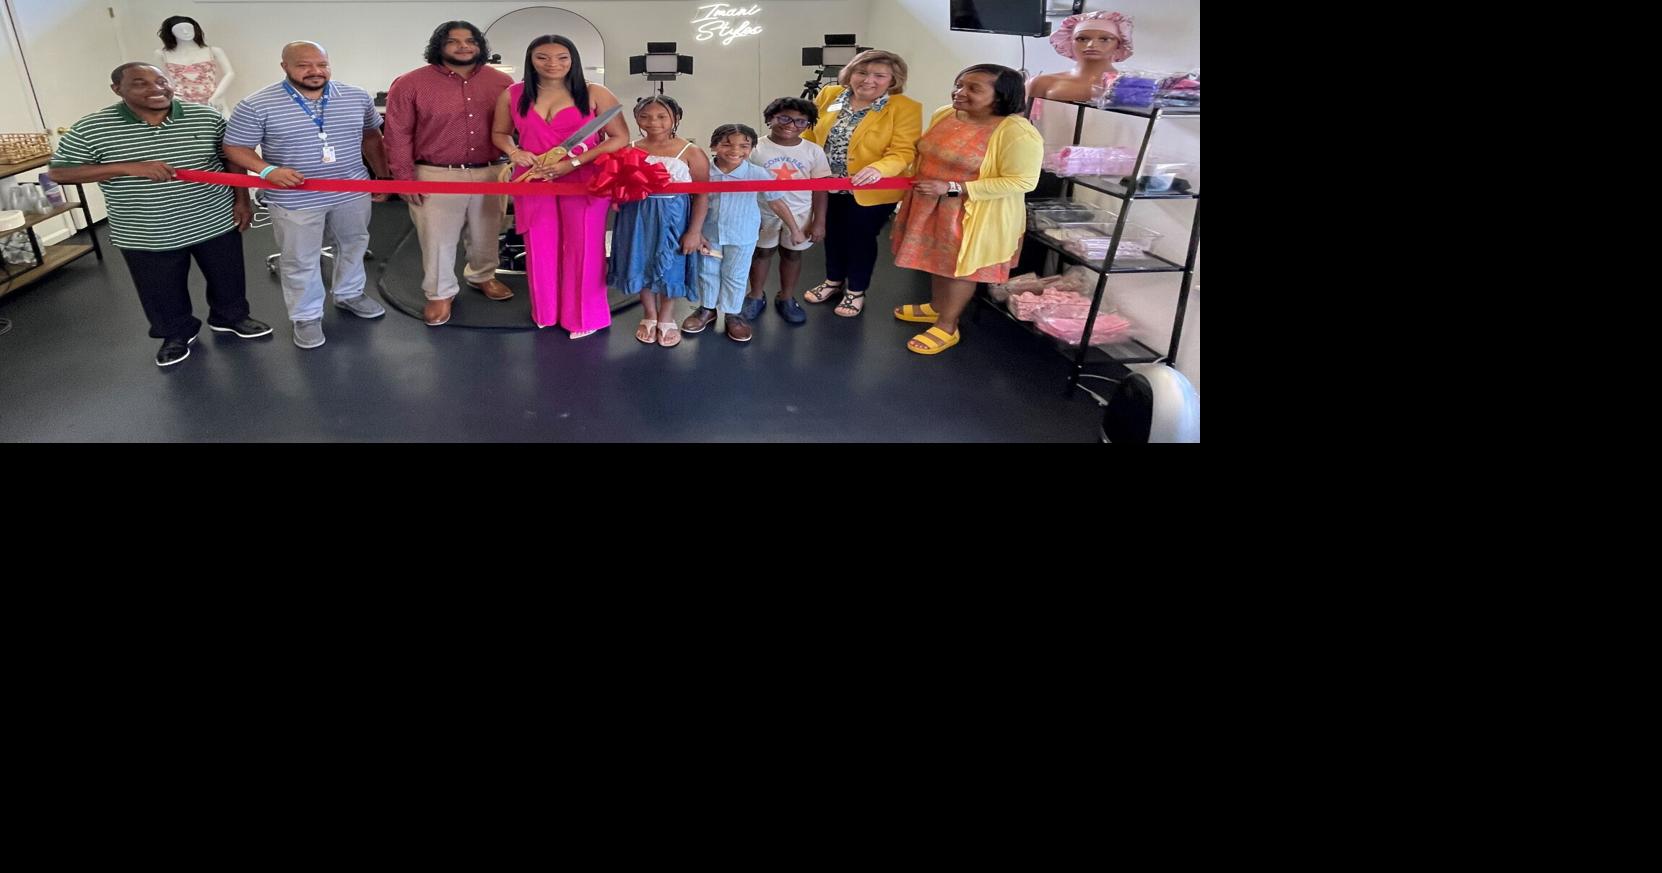 Imani Hairston expands with new salon and business space